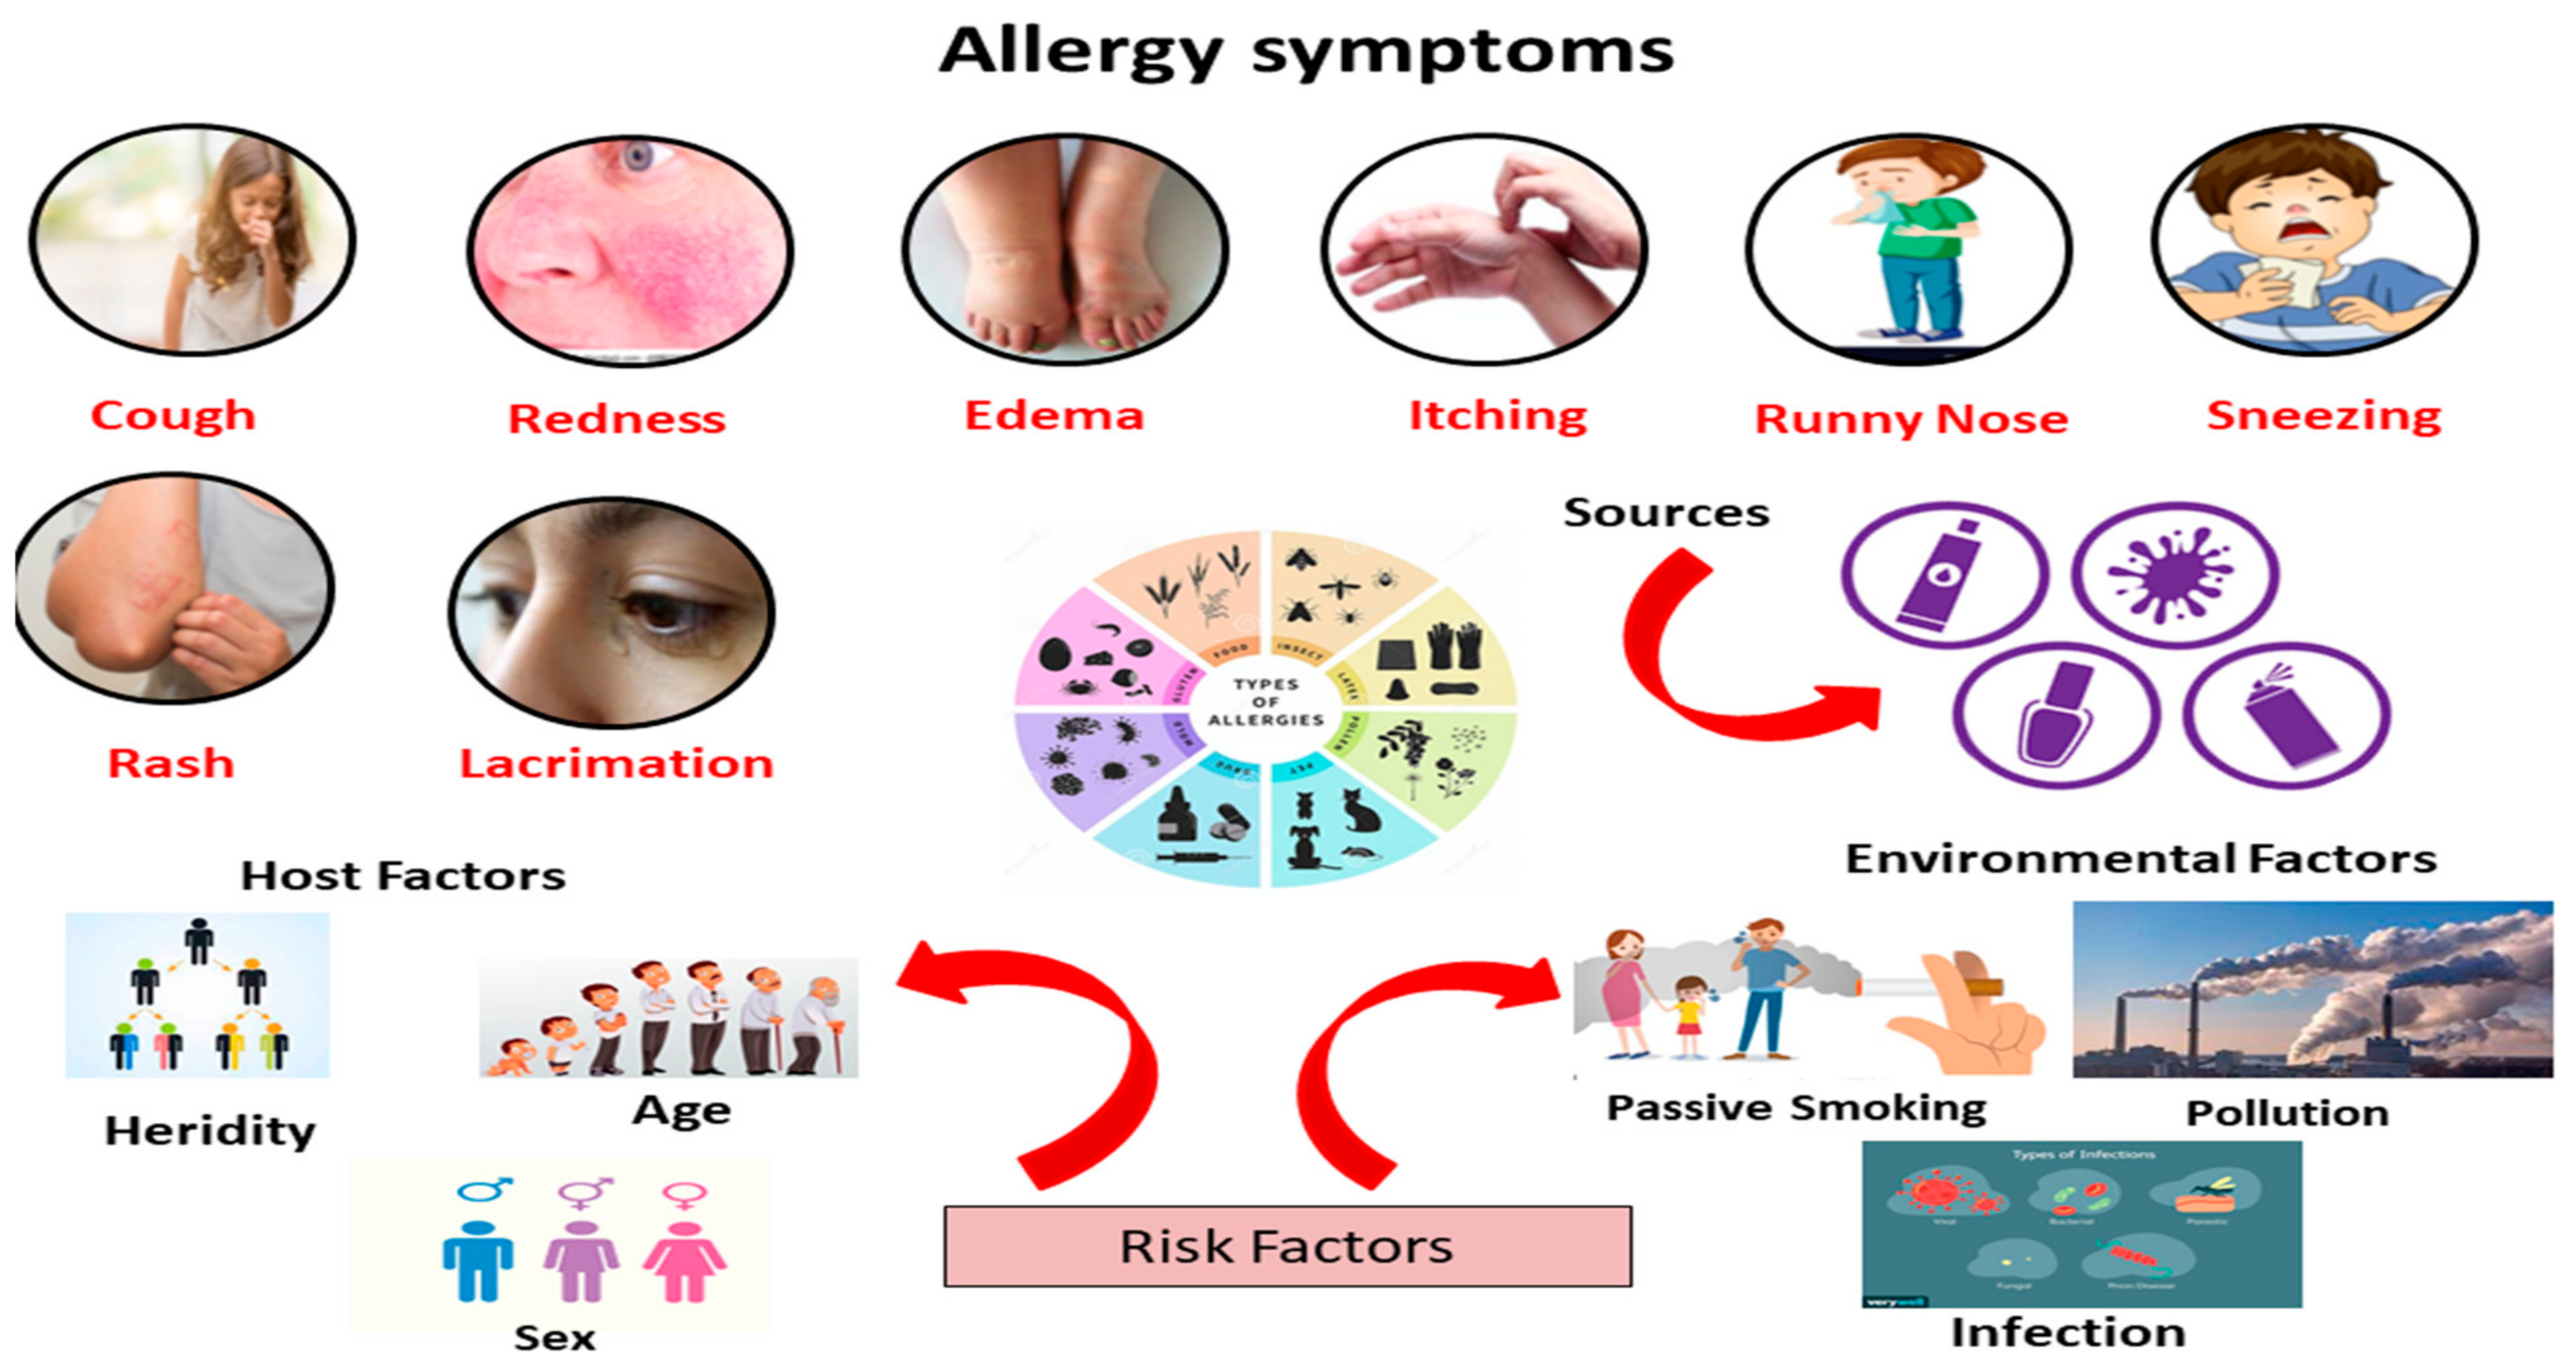 MSG Allergy: Symptoms, Testing, and Treatment